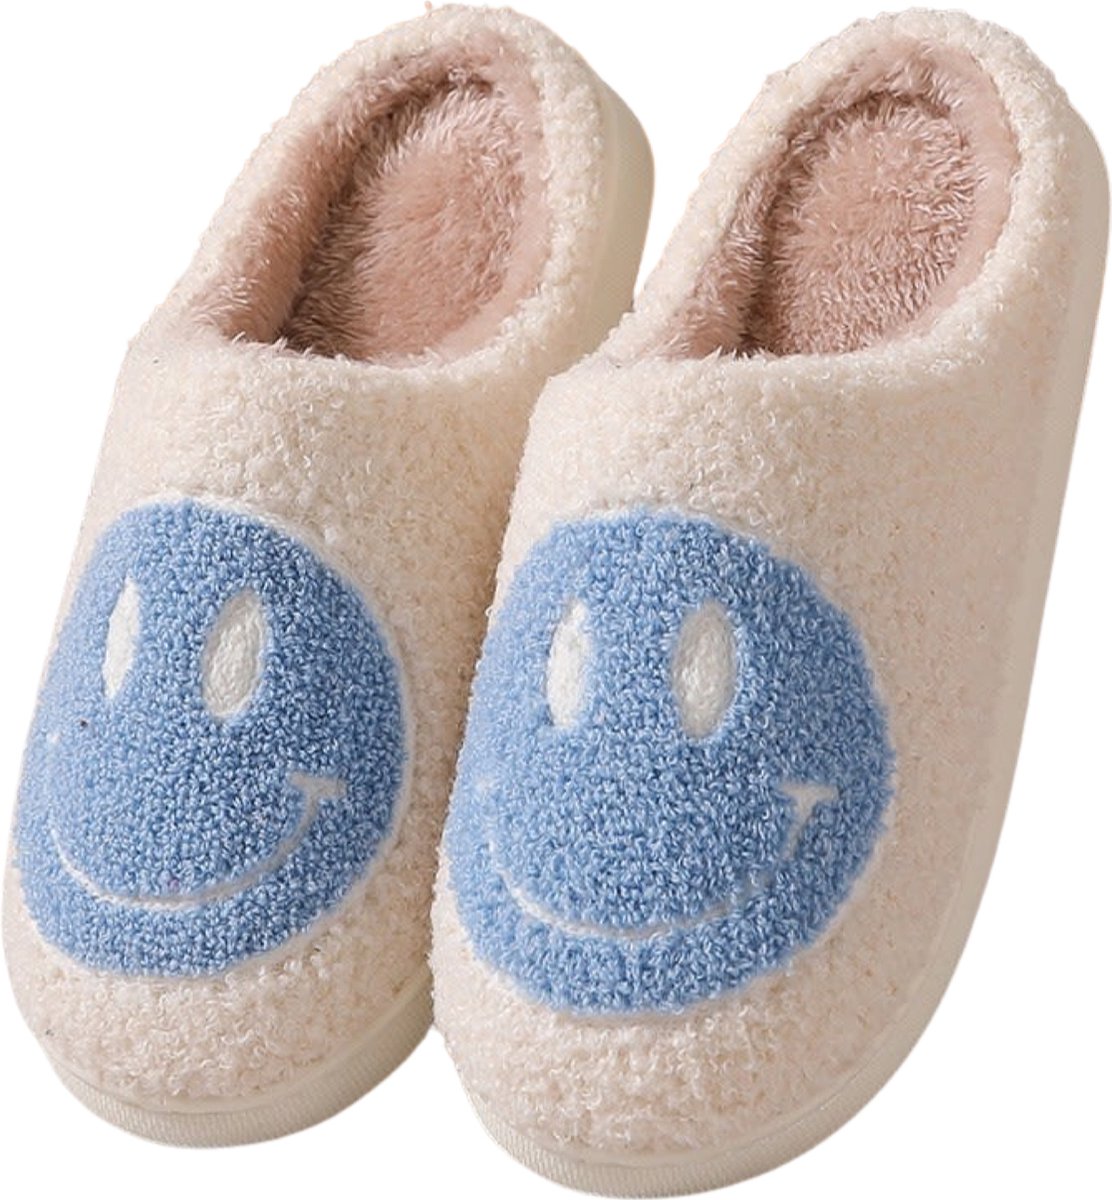 HAPPY SLIPPERS BLUE 36-37